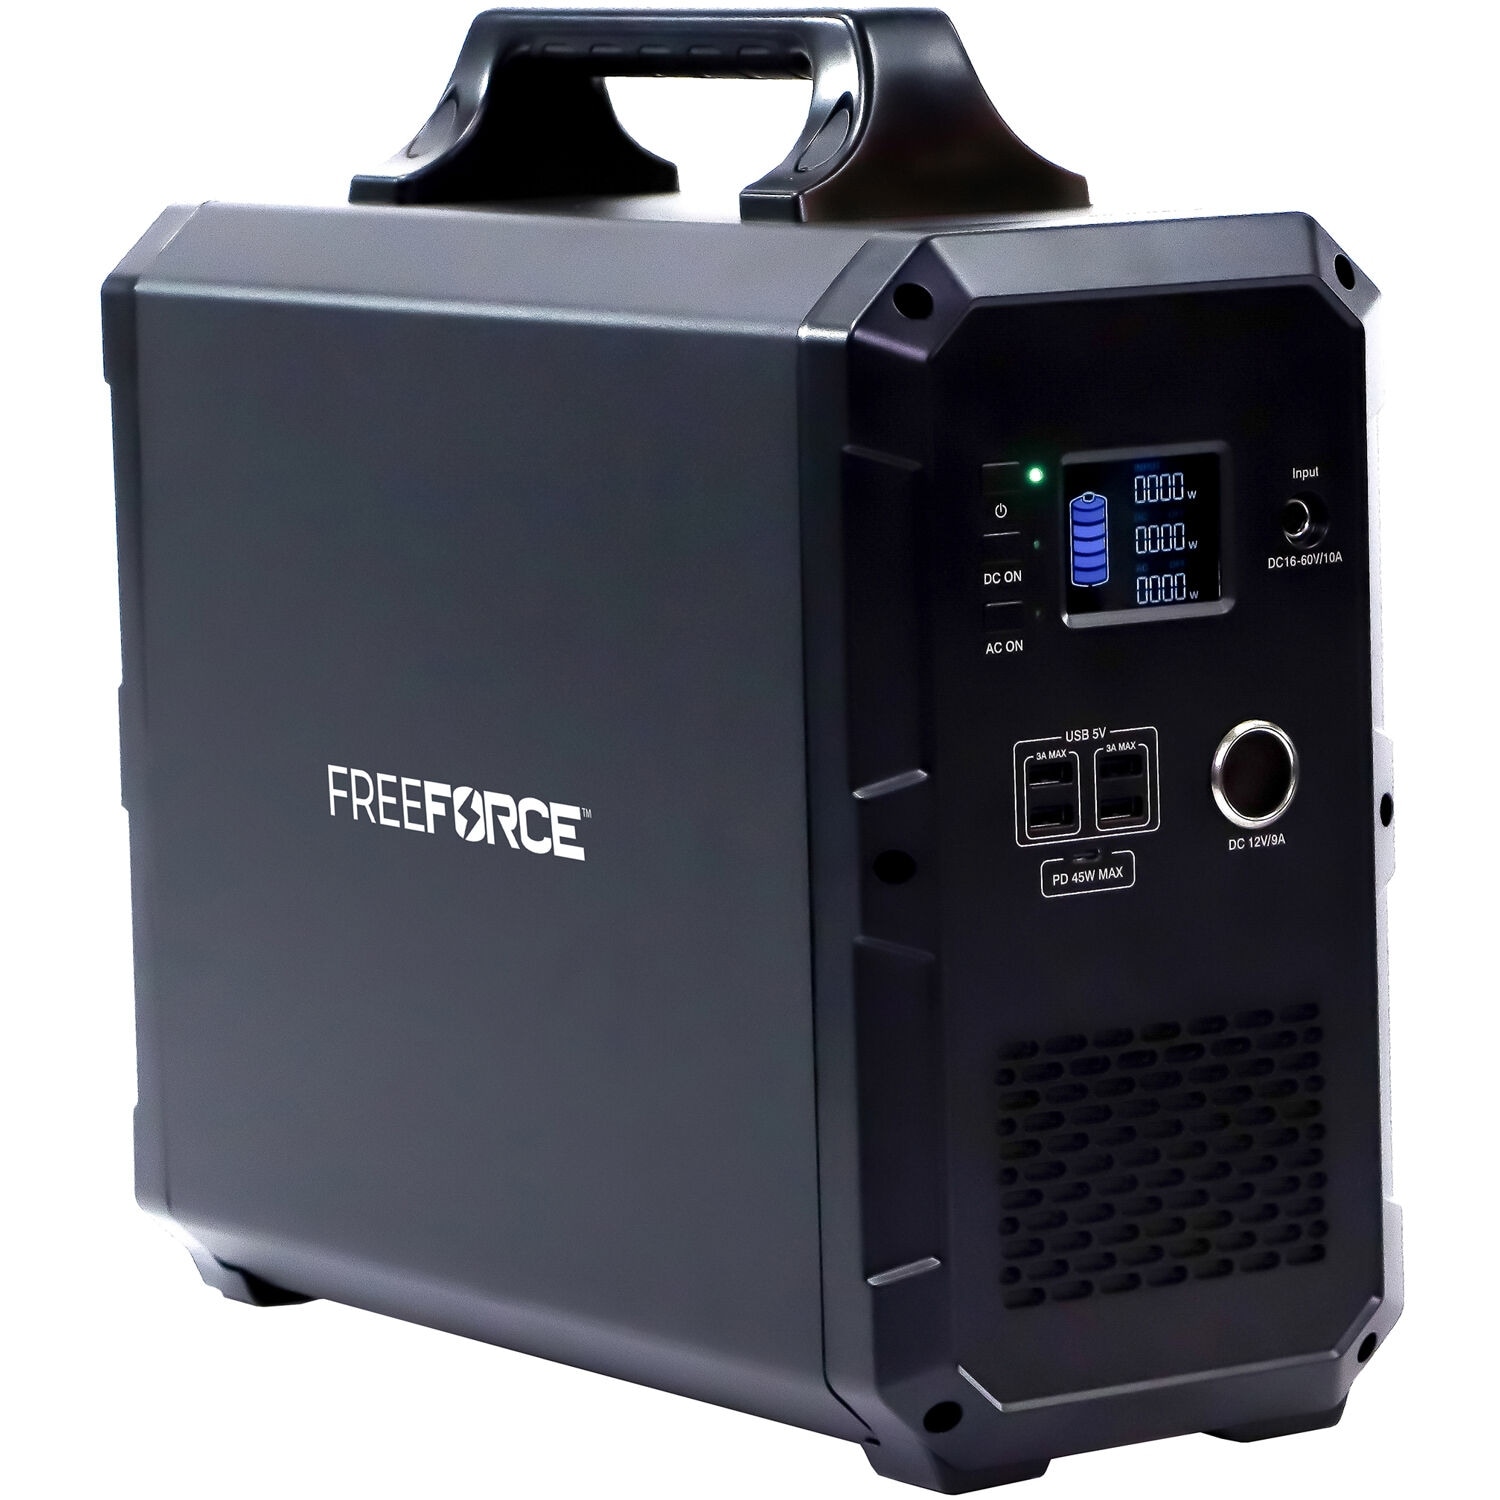 FreeForce Ultralite 1800 Portable Power Station, 1800Wh Rechargeable Lithium Battery Power Bank -  FUL1800